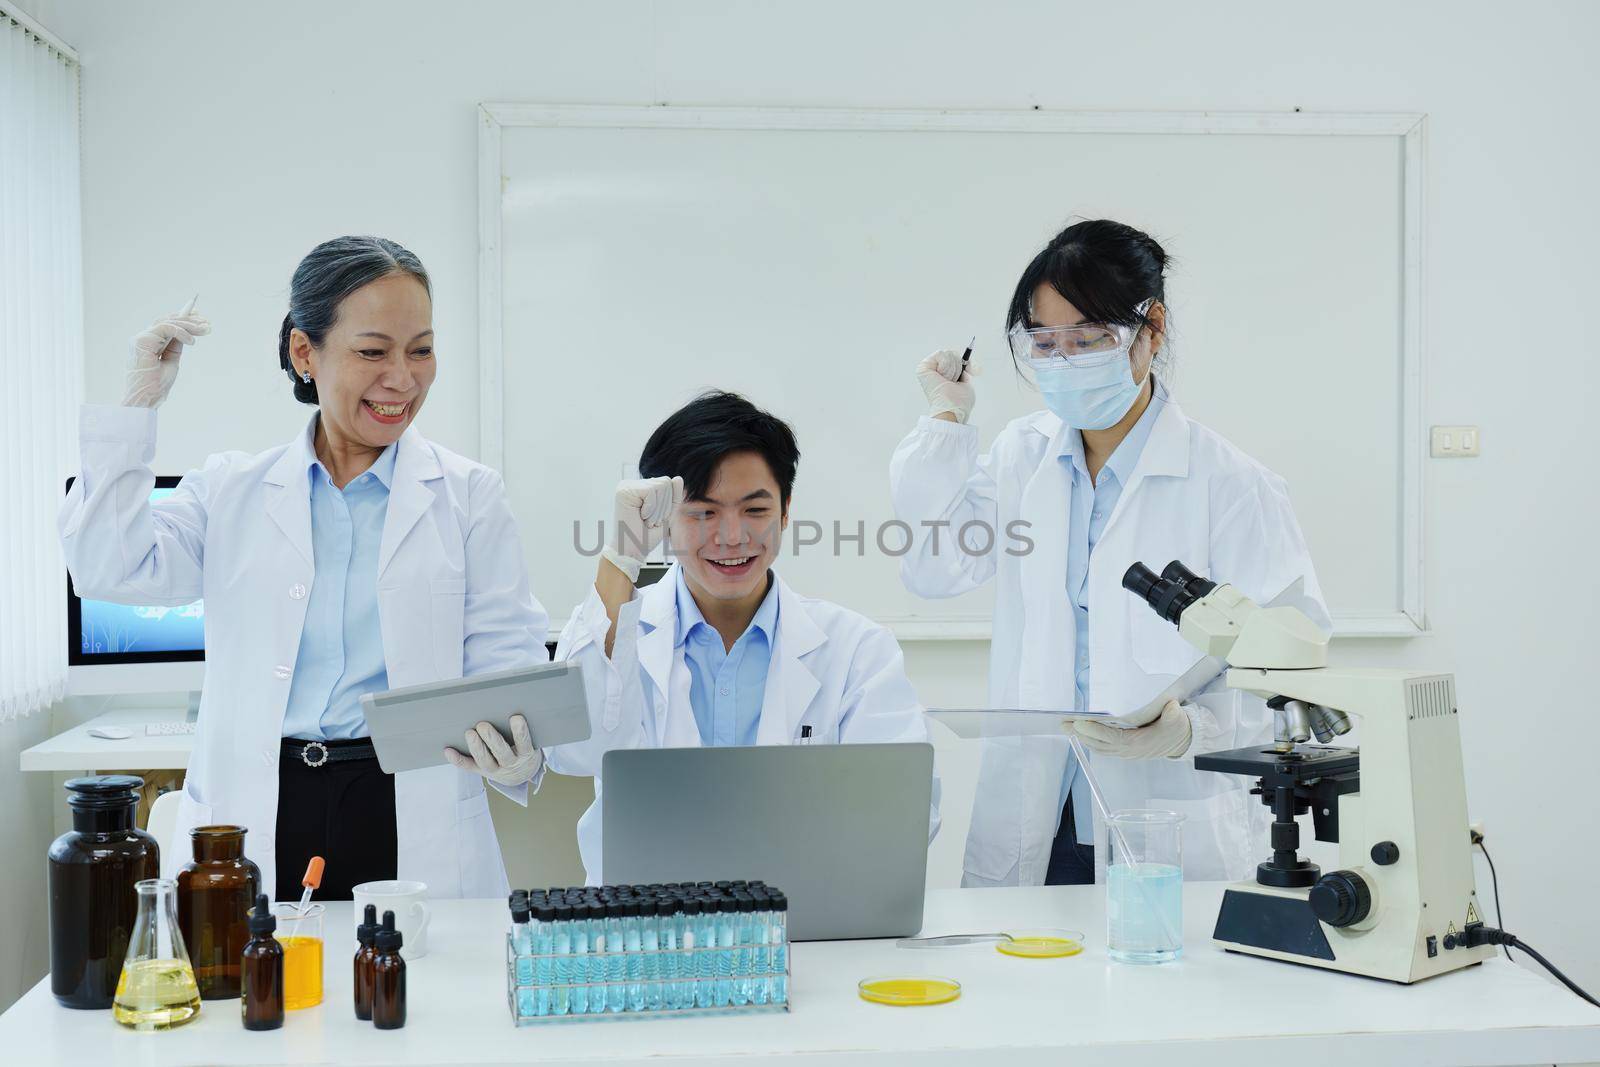 medical research laboratories, scientists analyze chemical samples Discuss technological innovations. Advanced scientific laboratories for medicine, biotechnology